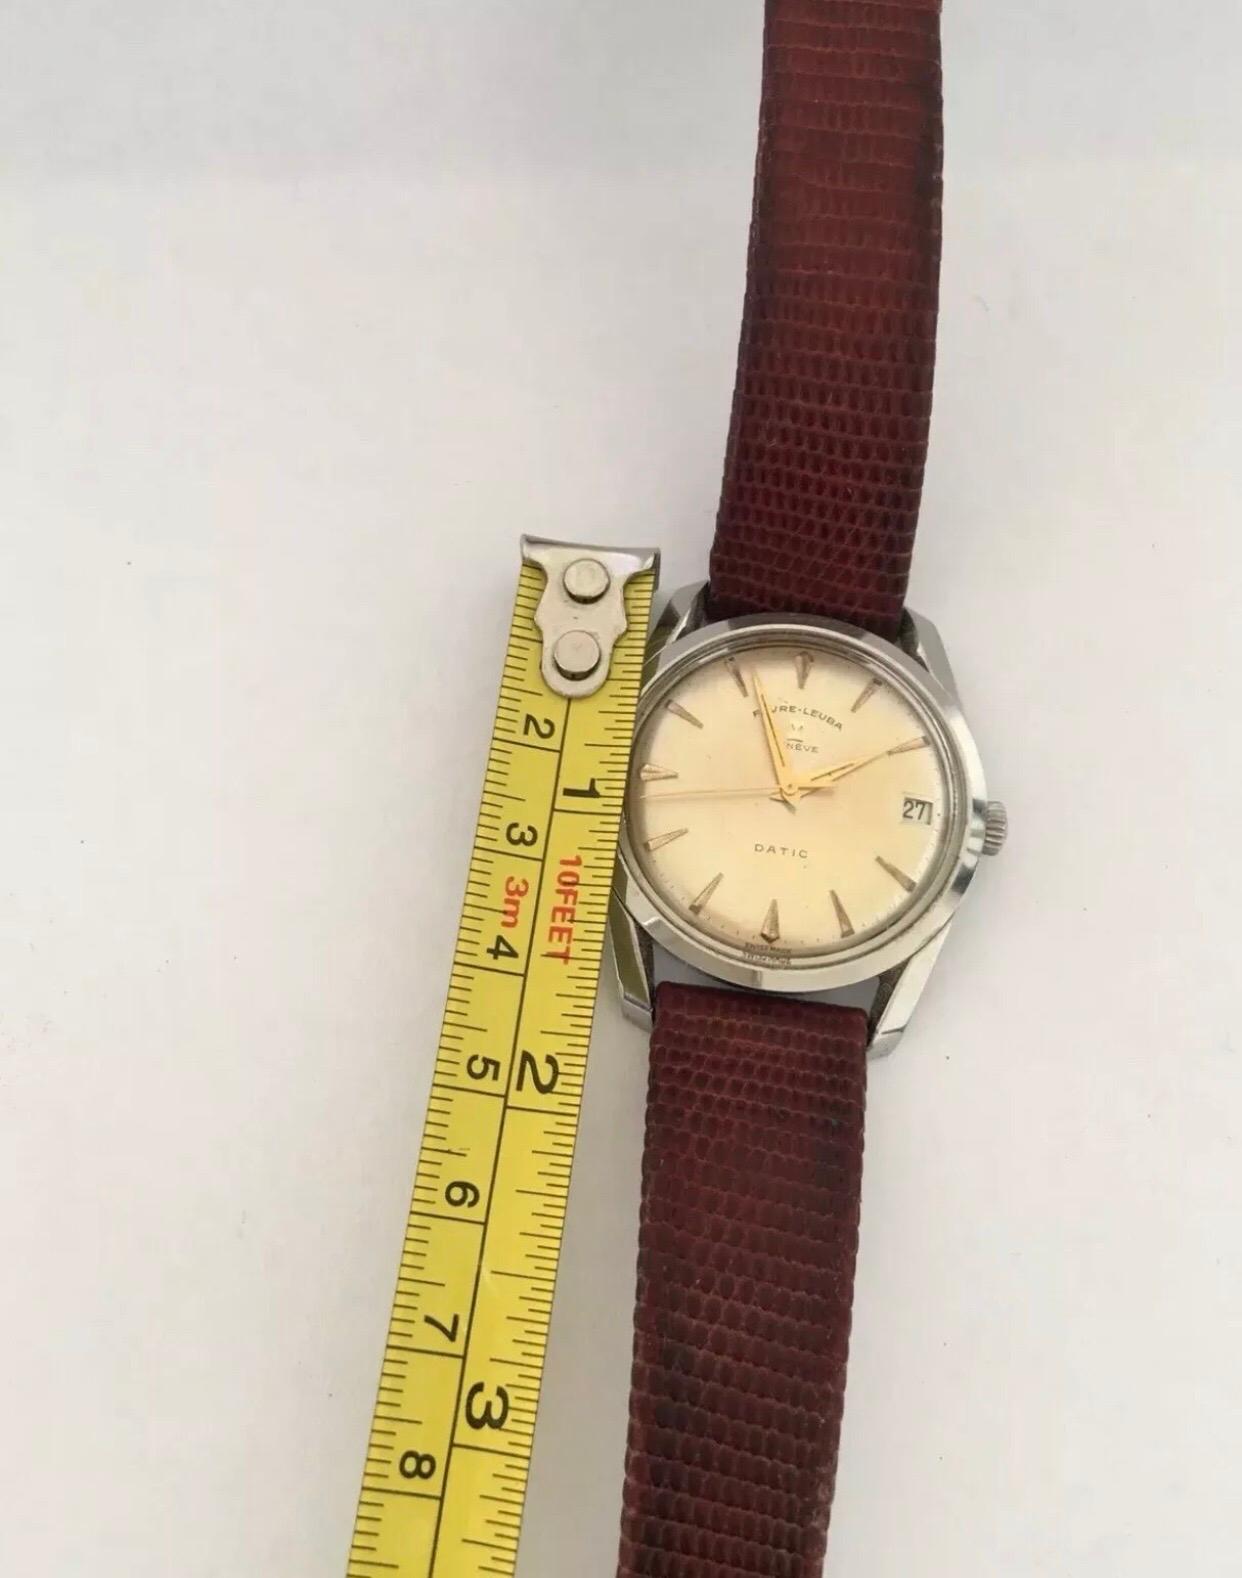 Vintage 1960’s Stainless Steel Favre-Leuba Geneve Datic Watch In Good Condition For Sale In Carlisle, GB